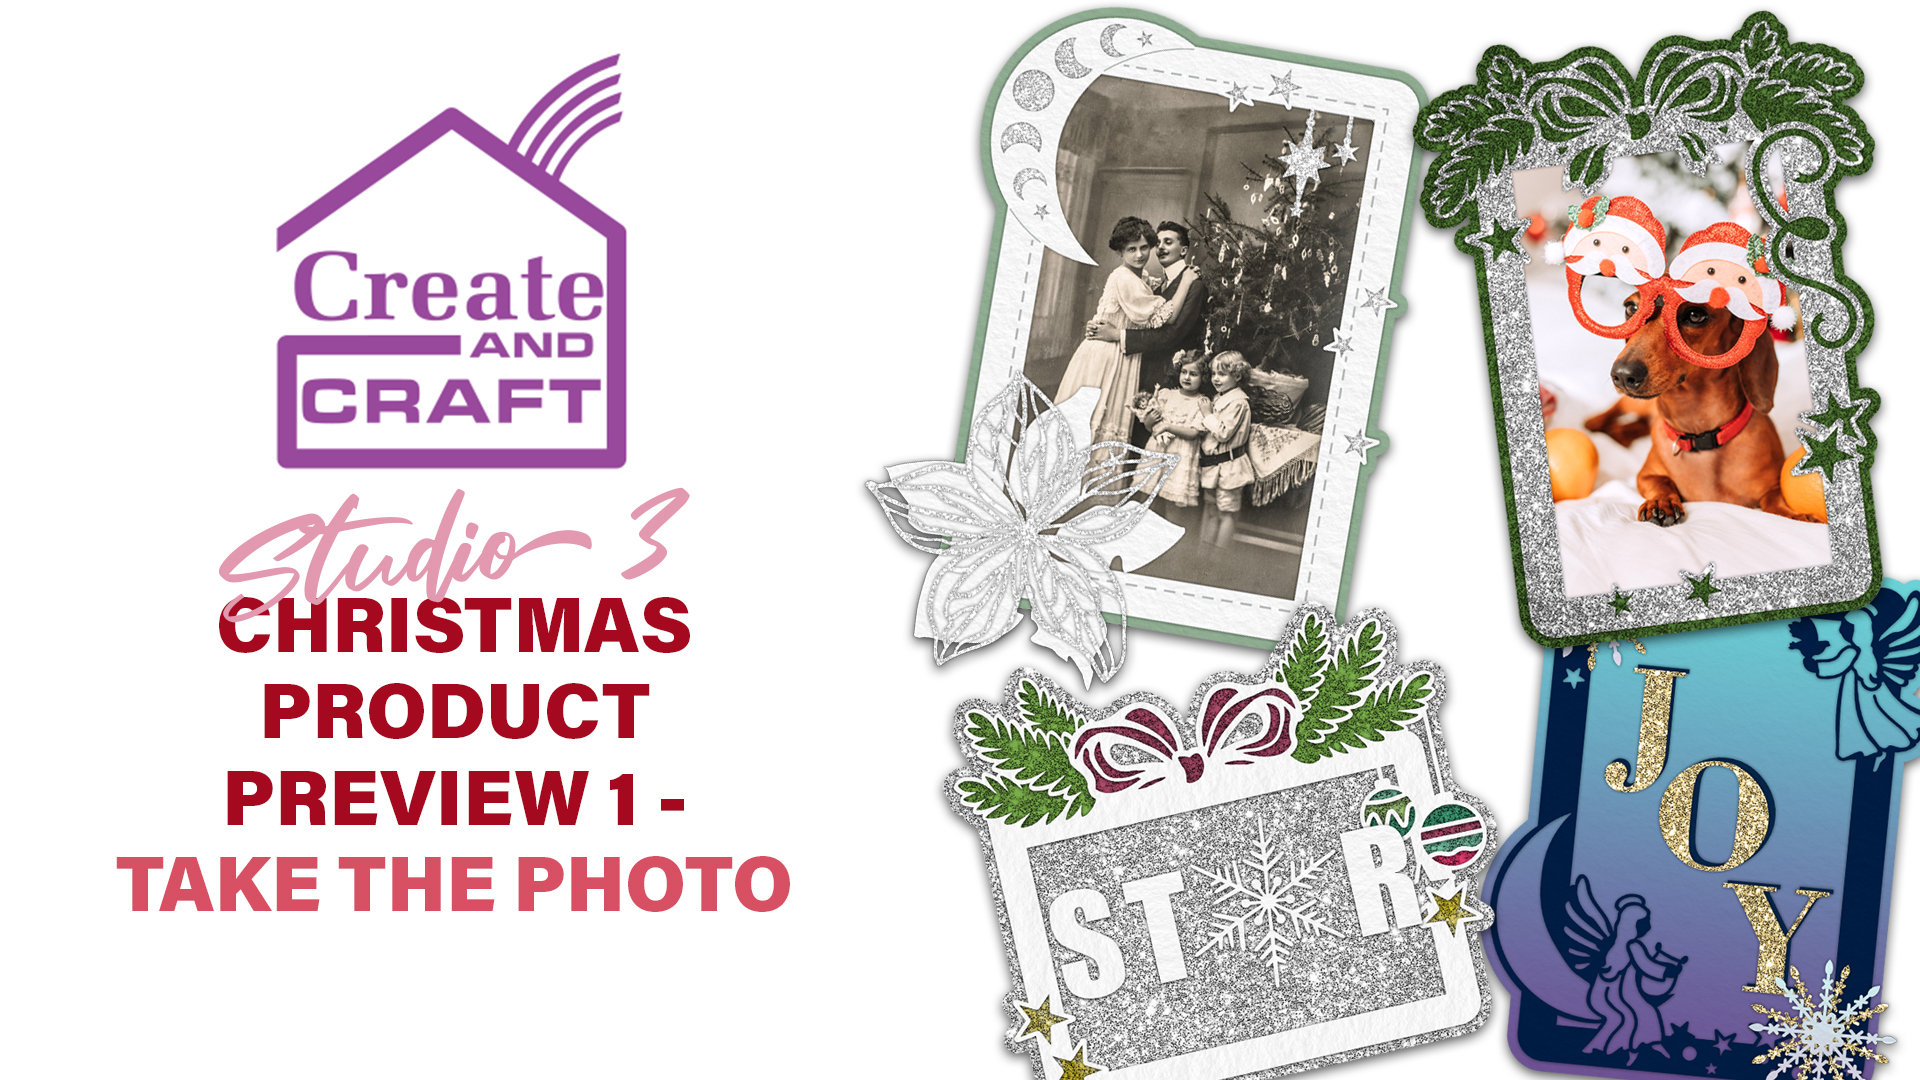 create-and-craft---christmas-launch-show-29th-june---product-preview-1---broadcast-19th-june-22